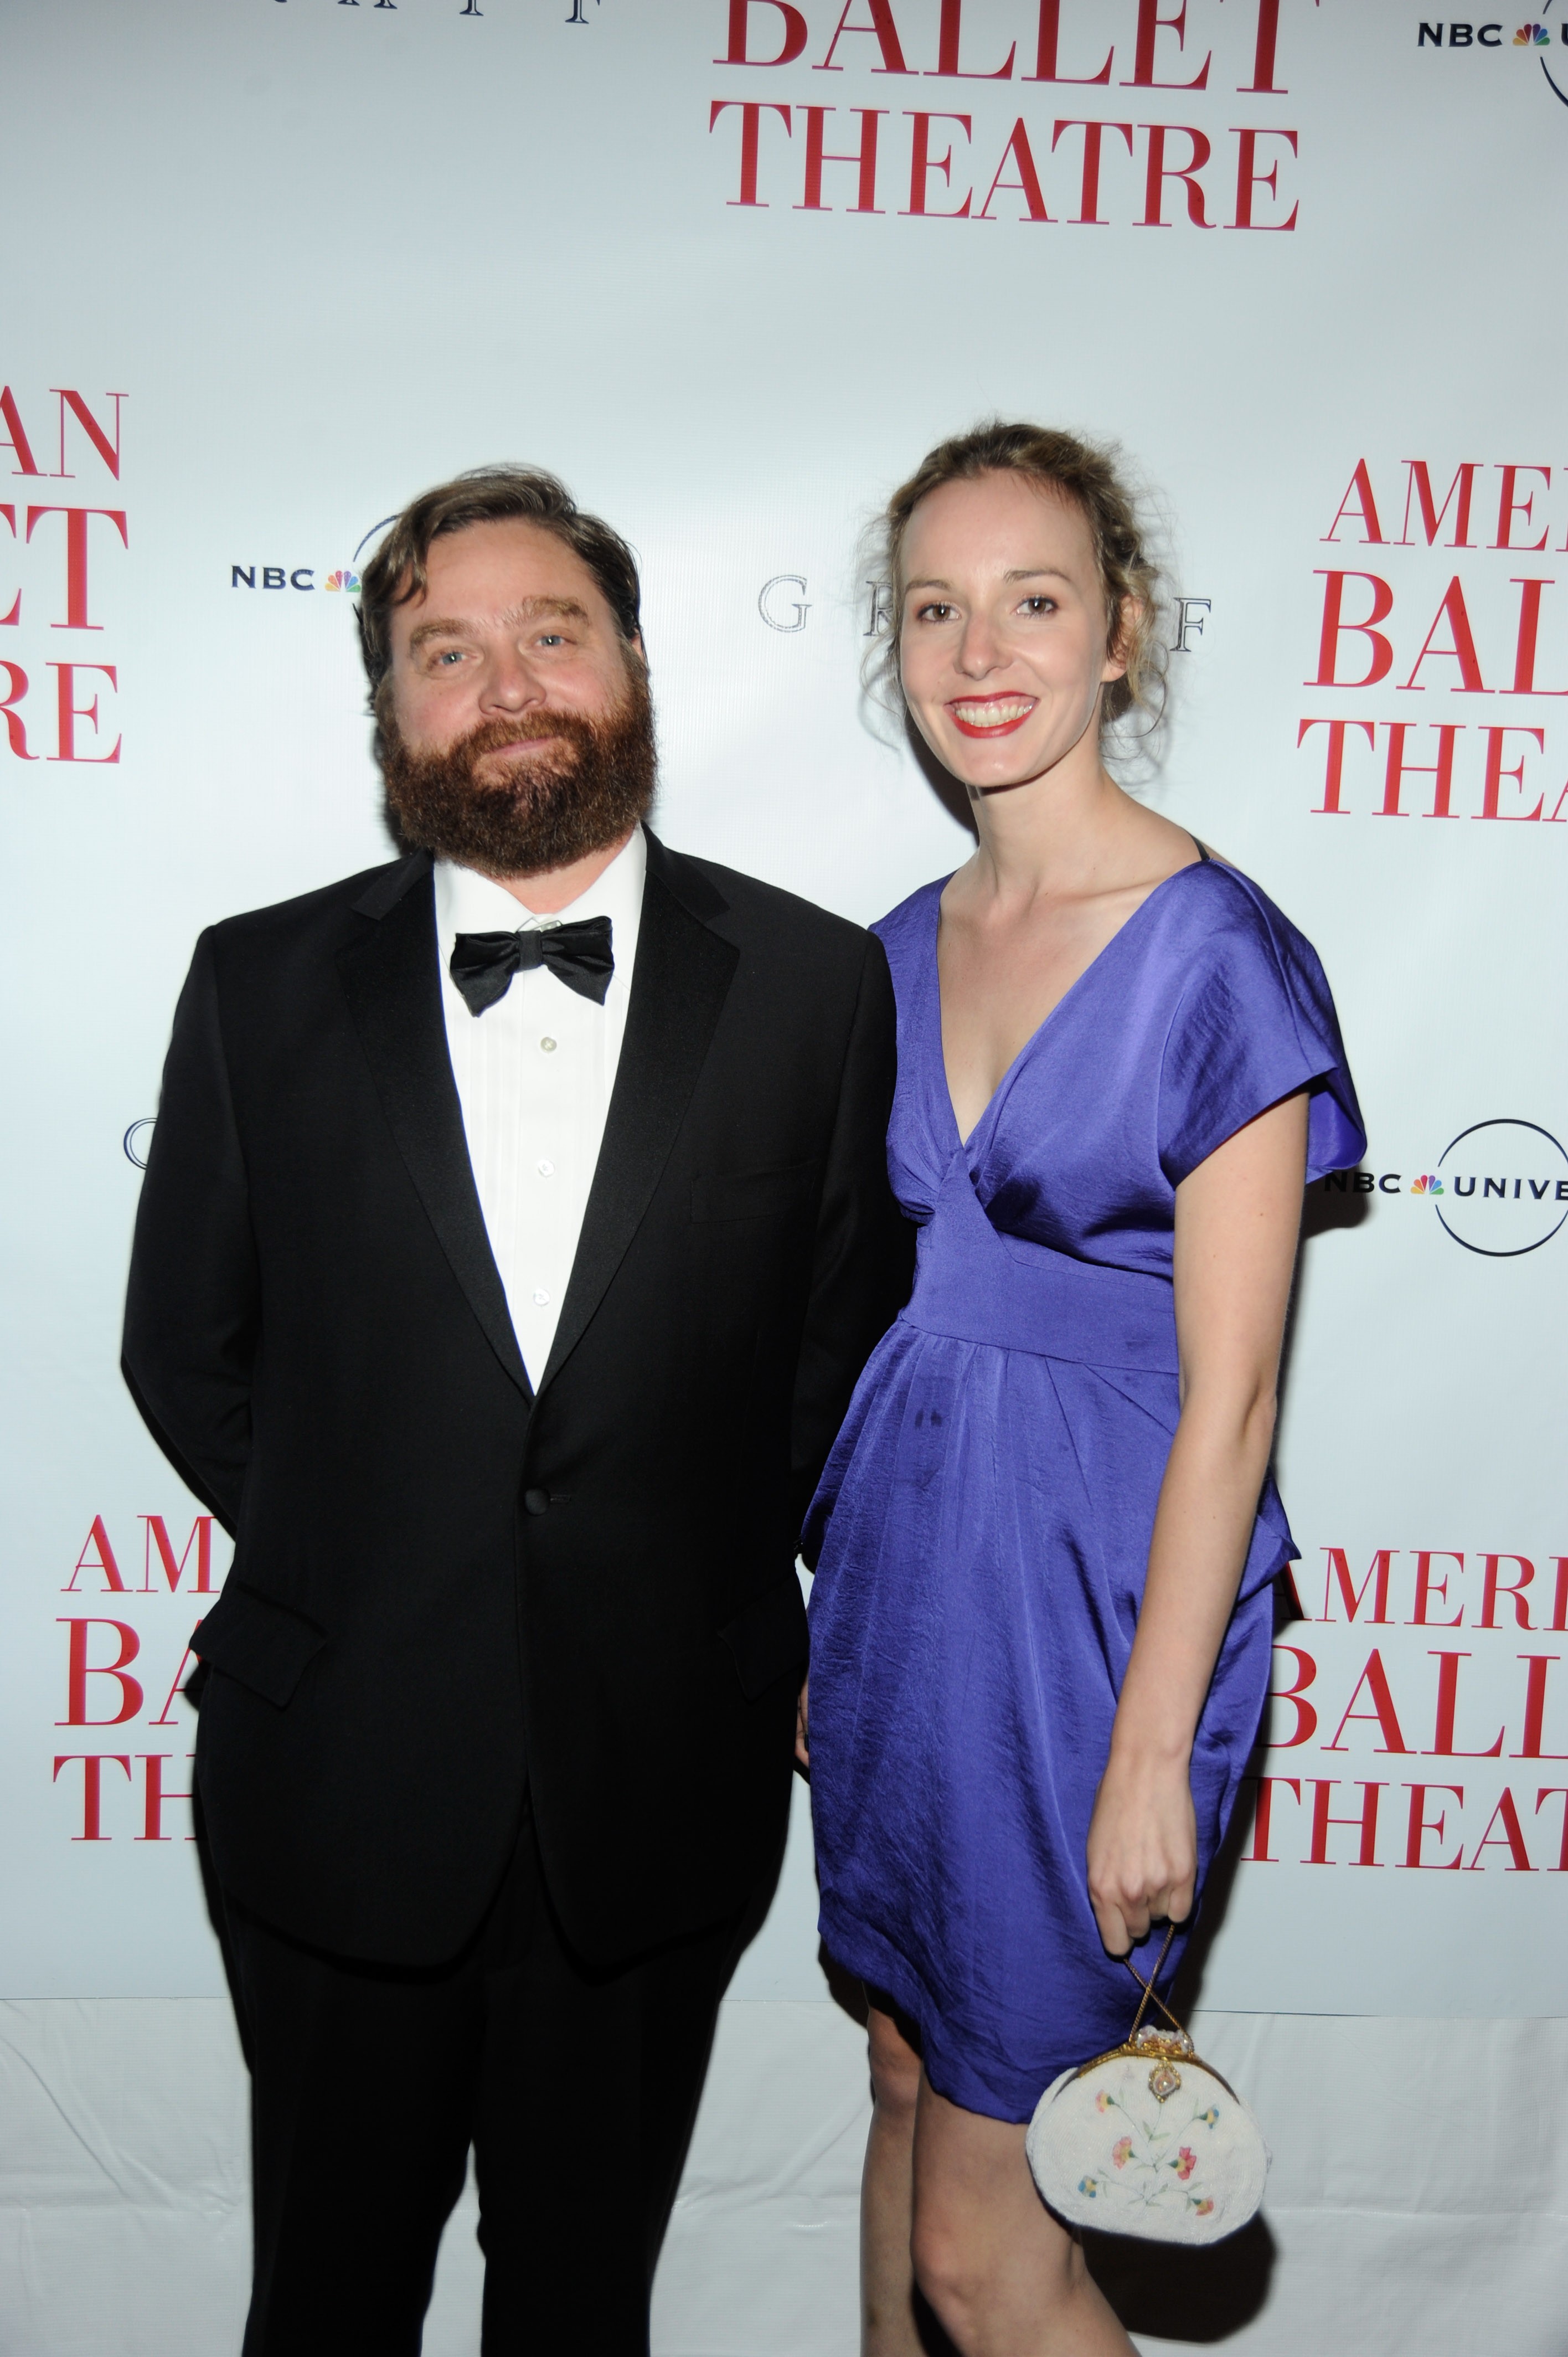 Zach Galifianakis and Quinn Lundberg attend the American Ballet Theatre's 70th Anniversary Season Spring Gala at The Metropolitan Opera House on May 17, 2010, in New York City. | Source: Getty Images